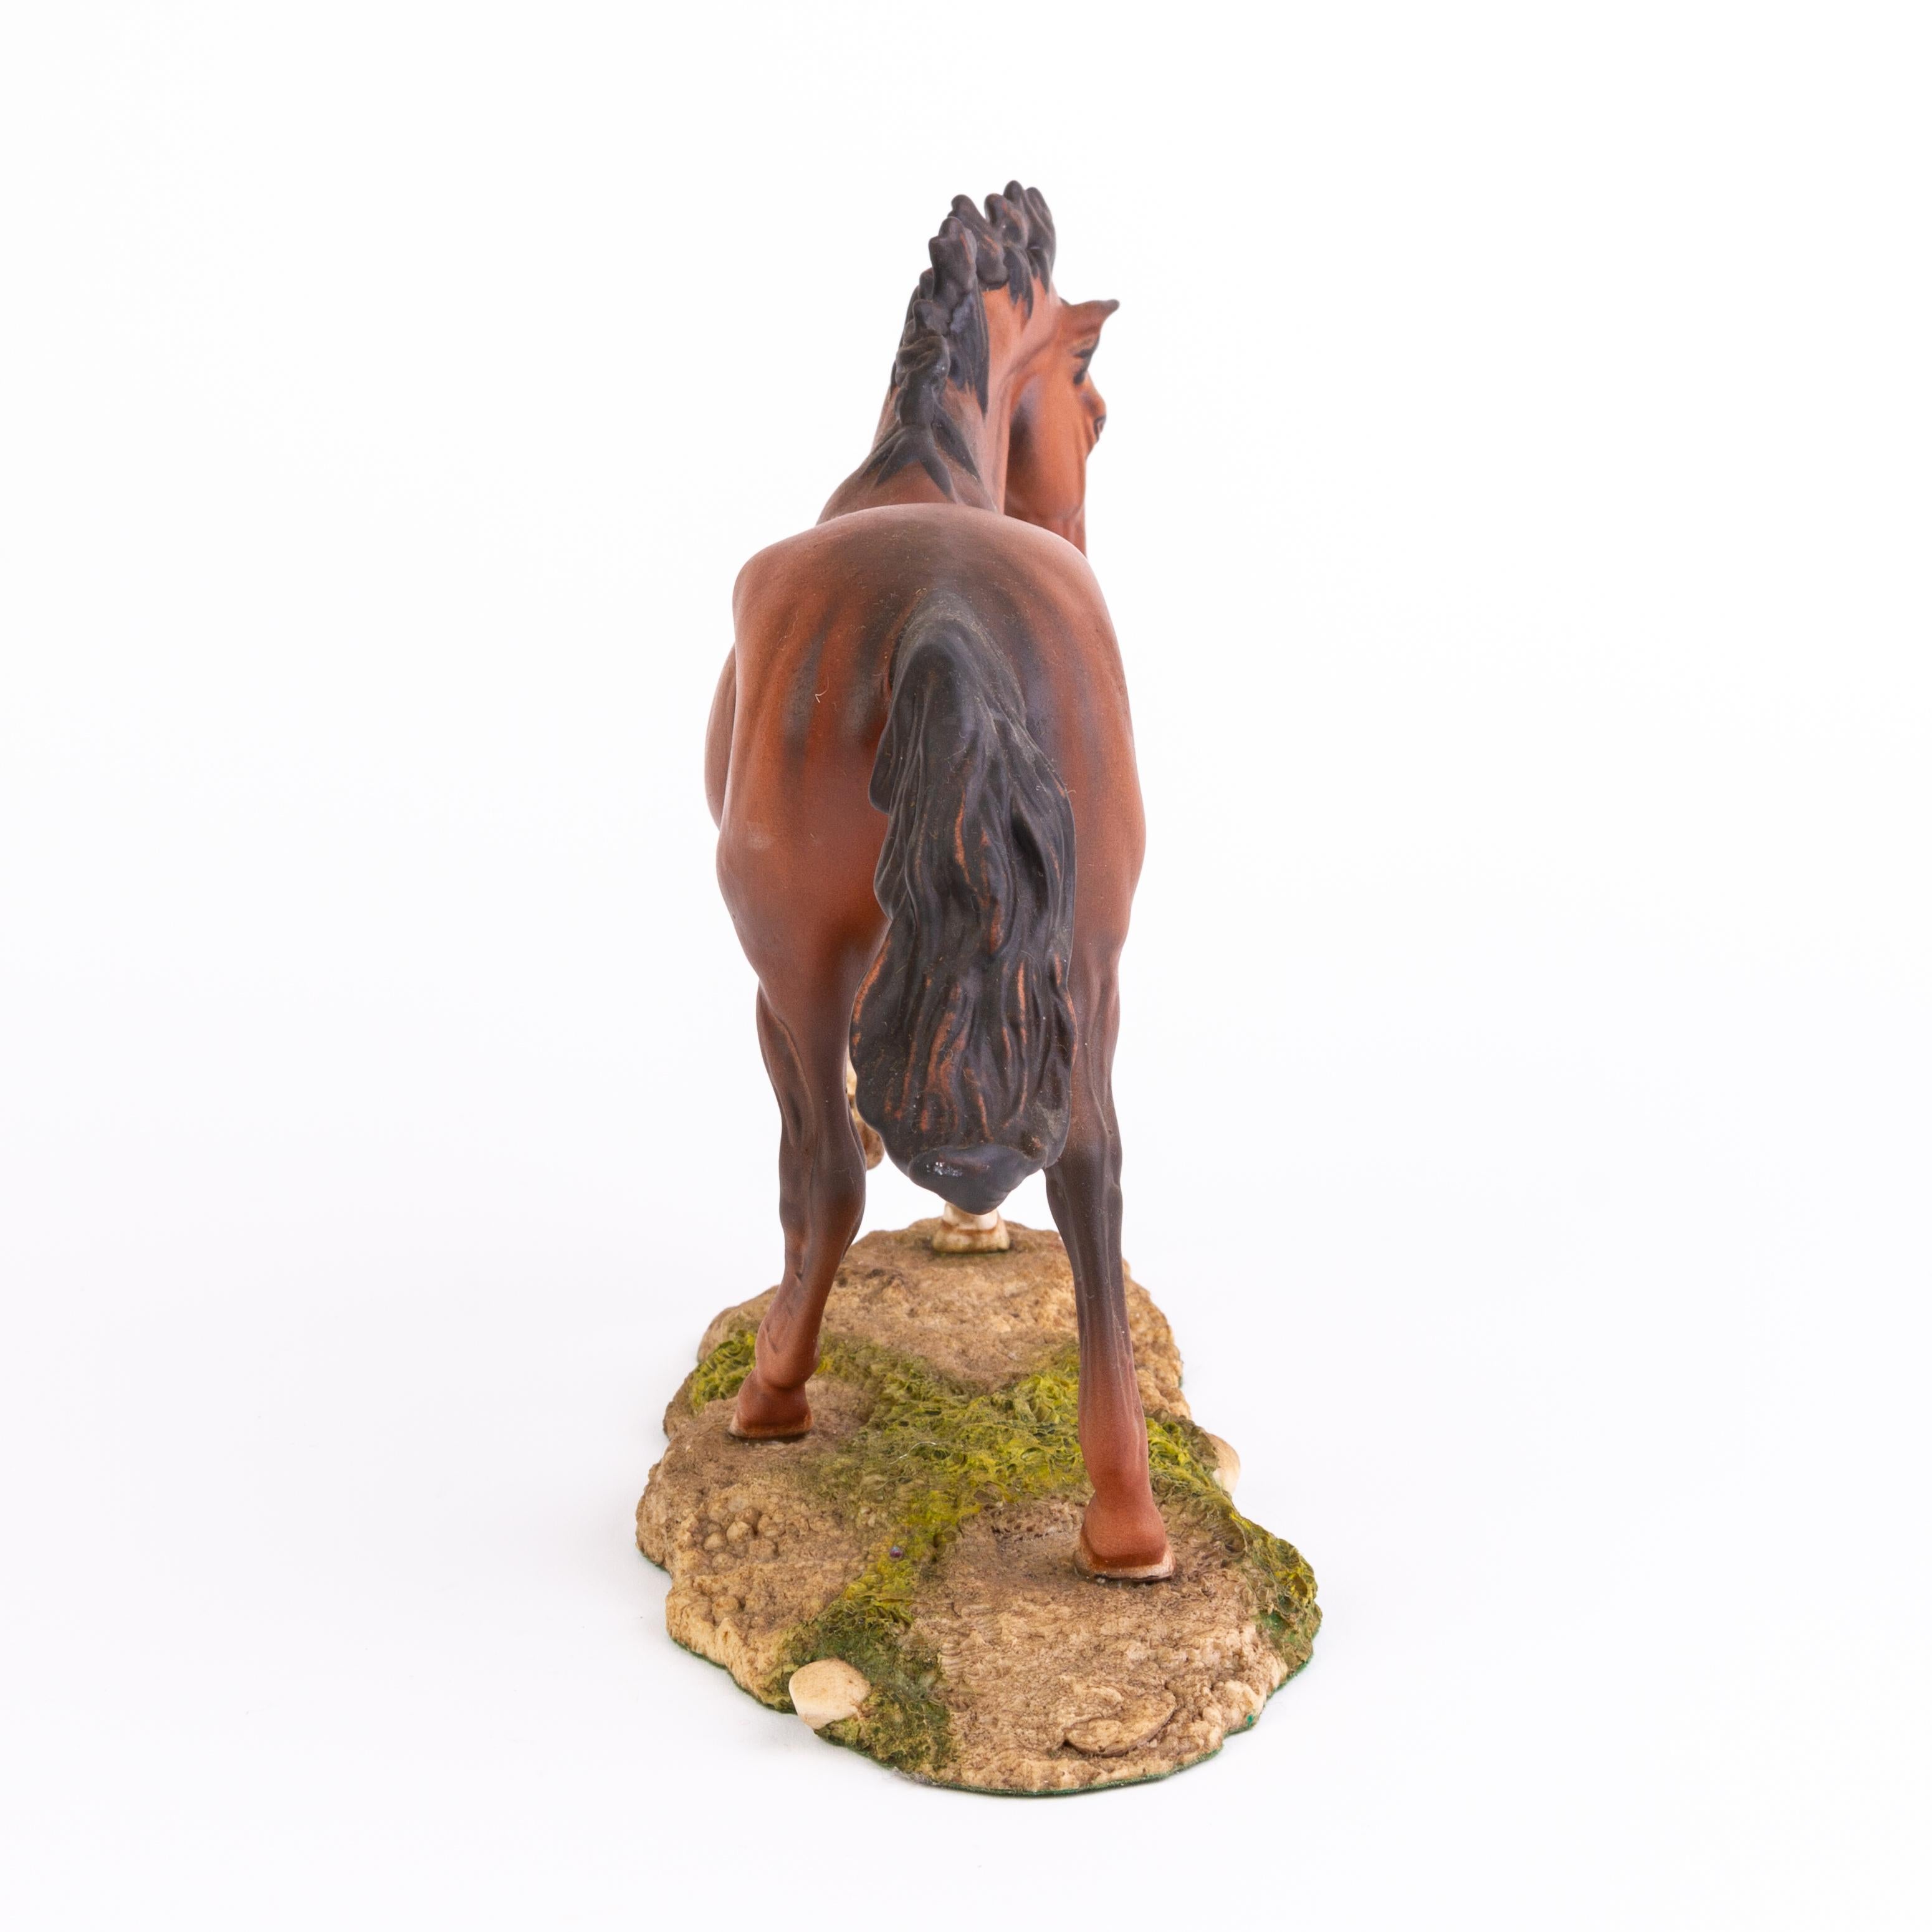 In good condition
From a private collection
Free international shipping
Royal Doulton Hand Painted Porcelain Horse Sculpture 